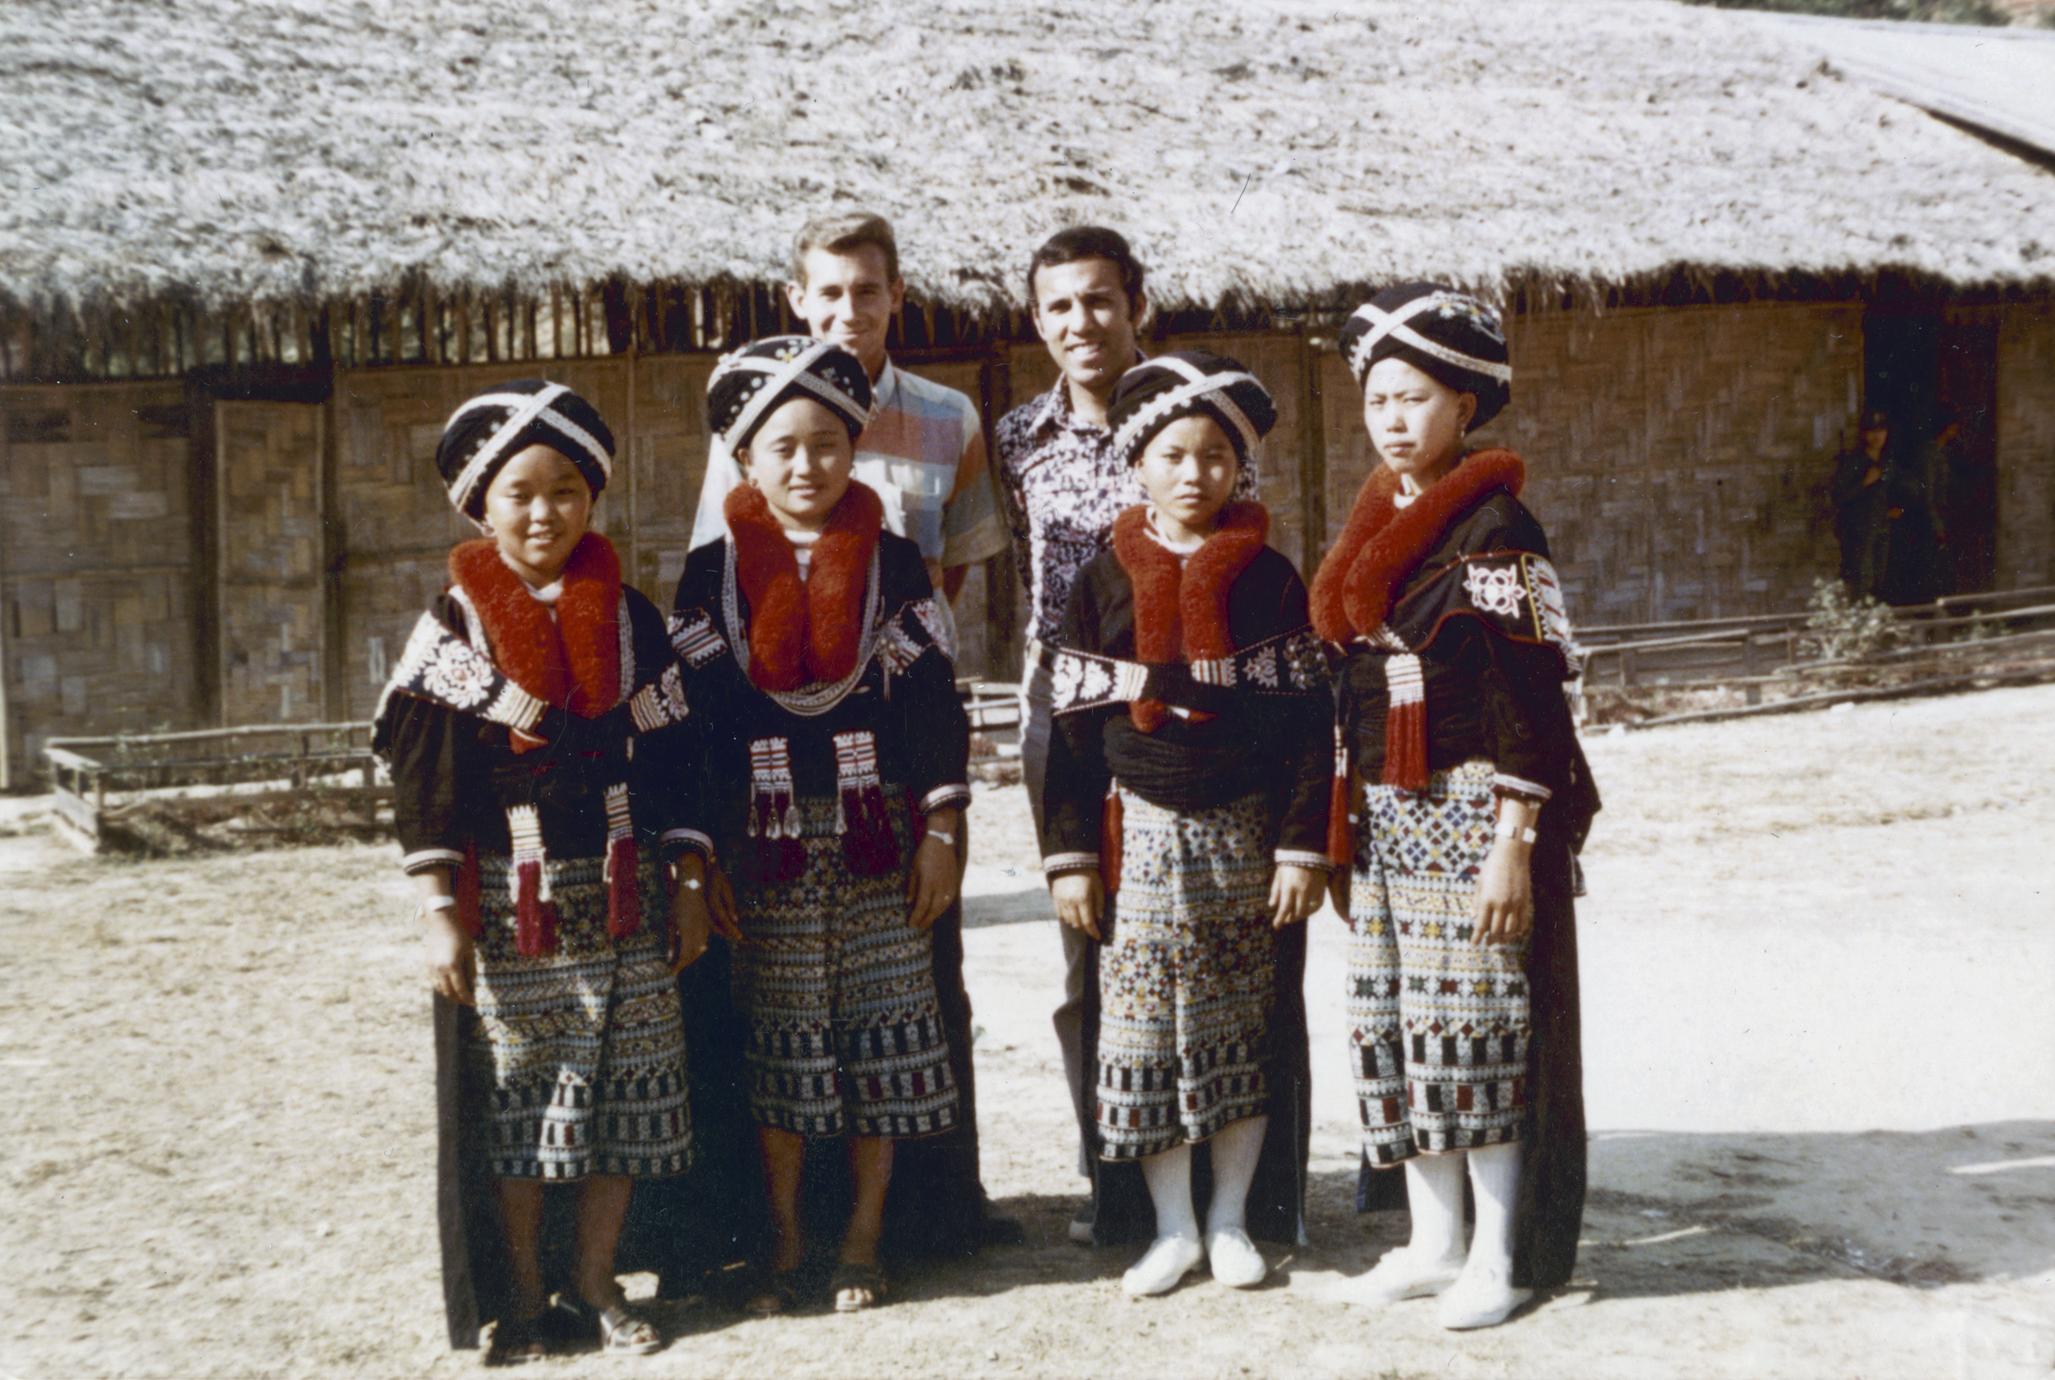 James Bowman and Bill Sage in Yao (Iu Mien) village in Houa Khong Province